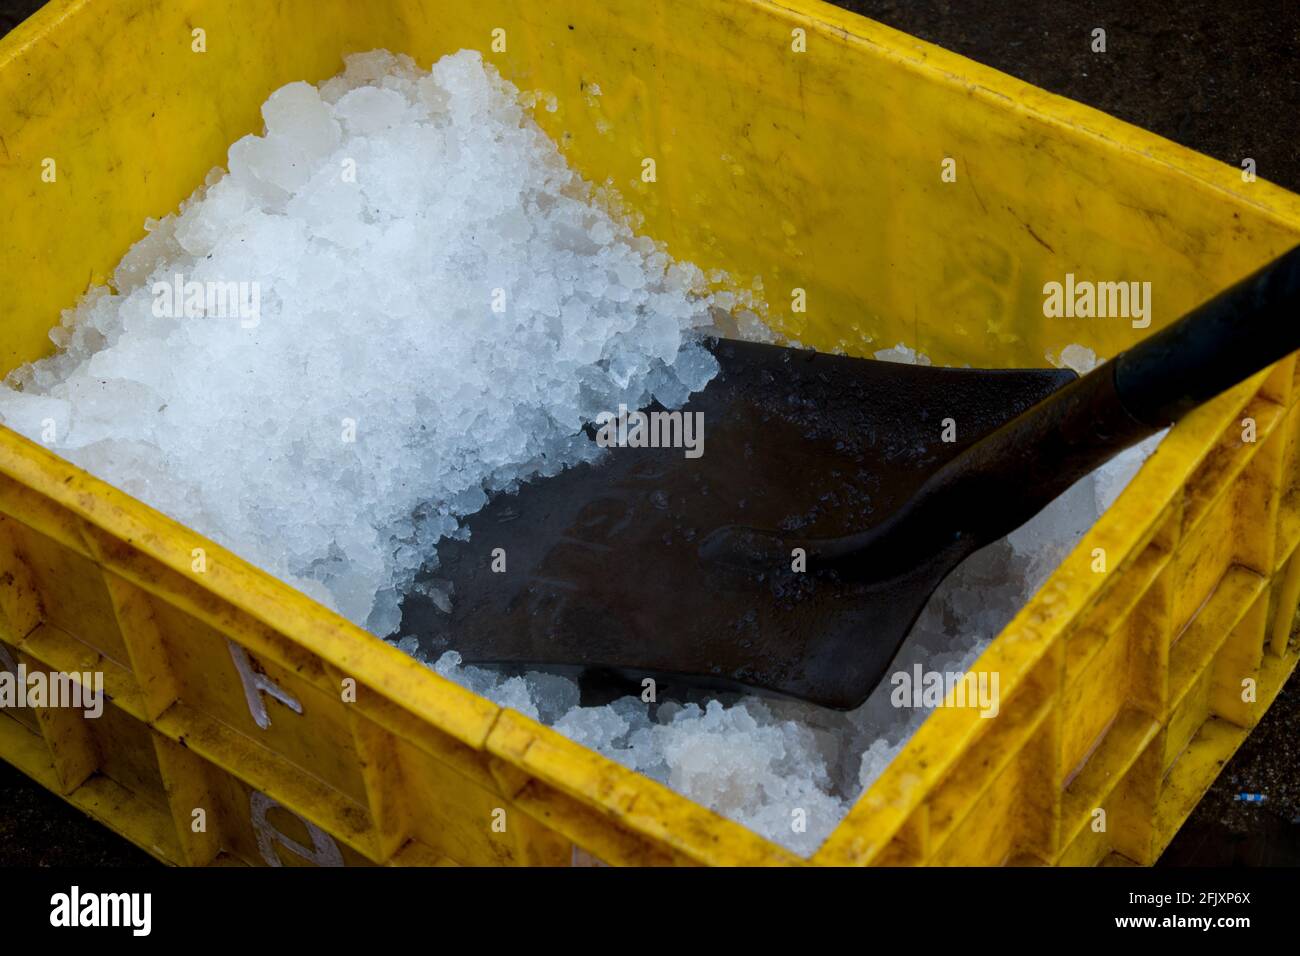 Crushed dry ice for fish packing on the fish crate. Stock Photo